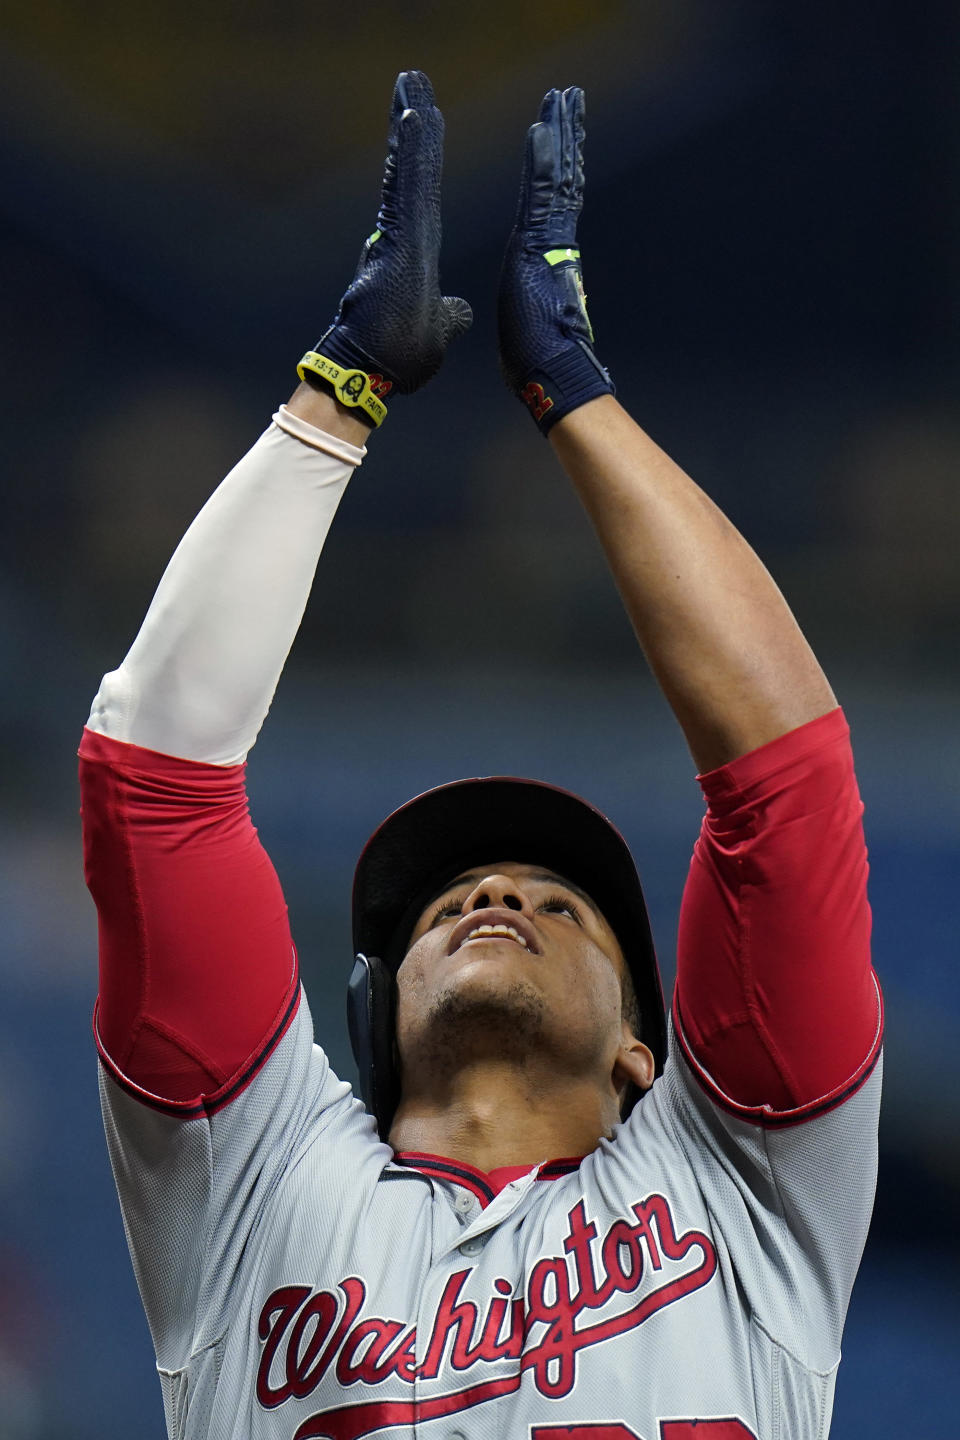 Washington Nationals' Juan Soto celebrates his two-run home run off Tampa Bay Rays starting pitcher Shane McClanahan during the first inning of a baseball game Wednesday, June 9, 2021, in St. Petersburg, Fla. (AP Photo/Chris O'Meara)